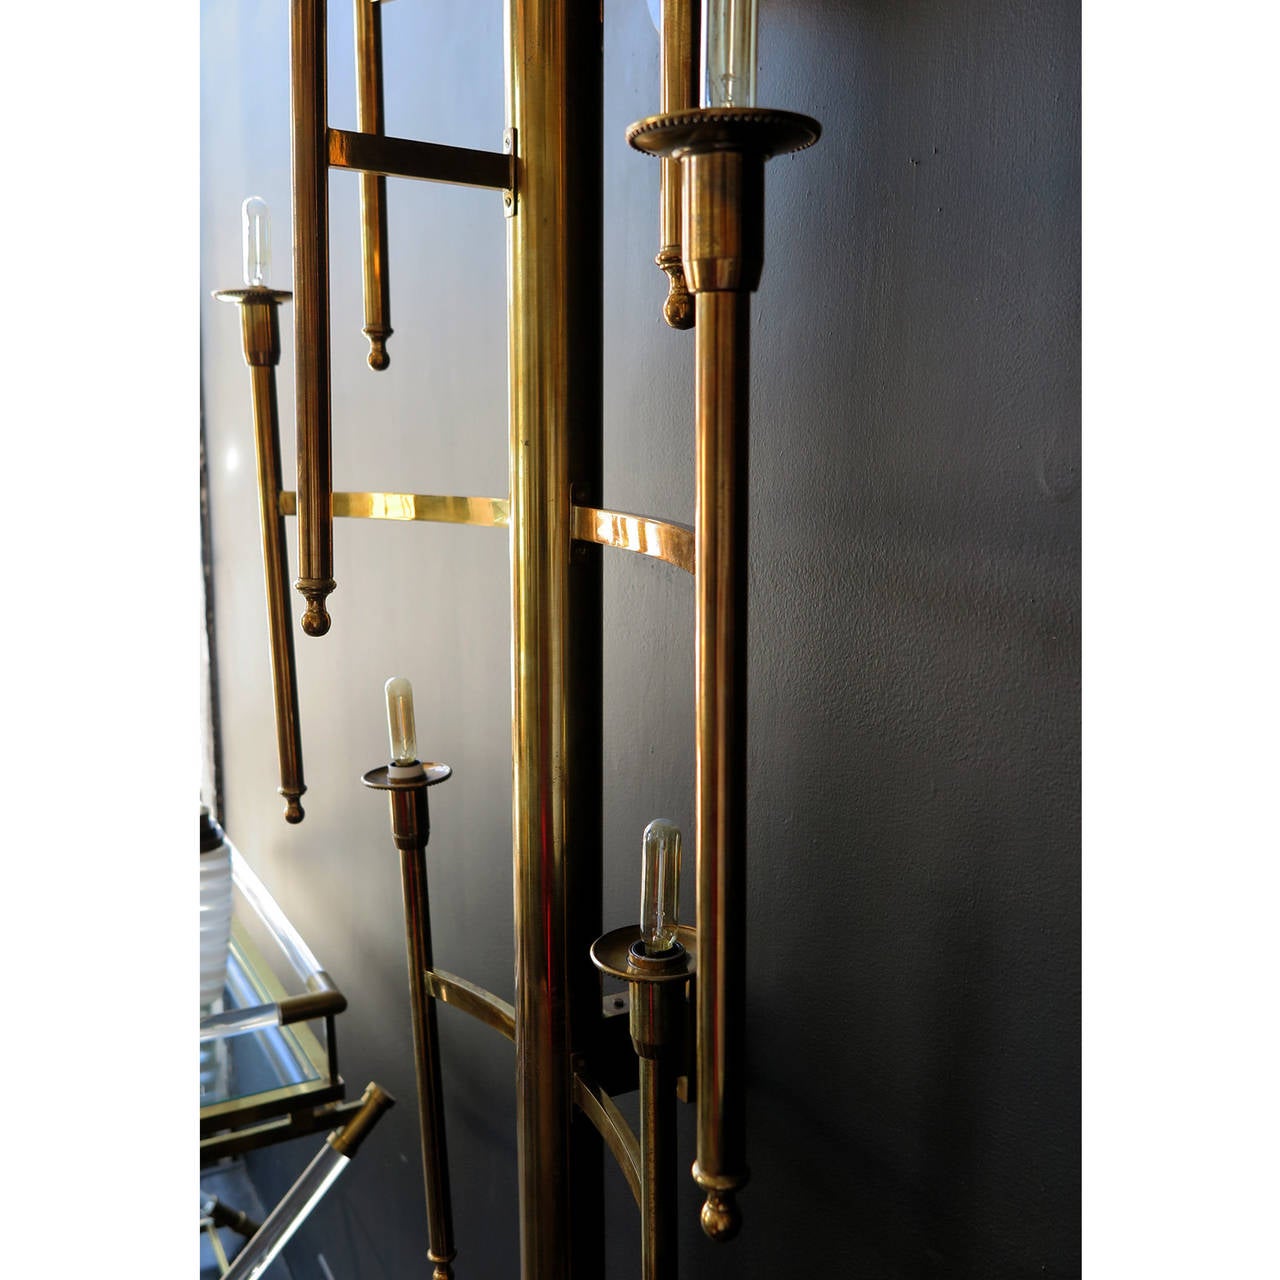 Impressive pair of torch style sconces in antique brass. Oversized in scale. Top and bottom are capped with round brass balls. Each sconces has seven arms.